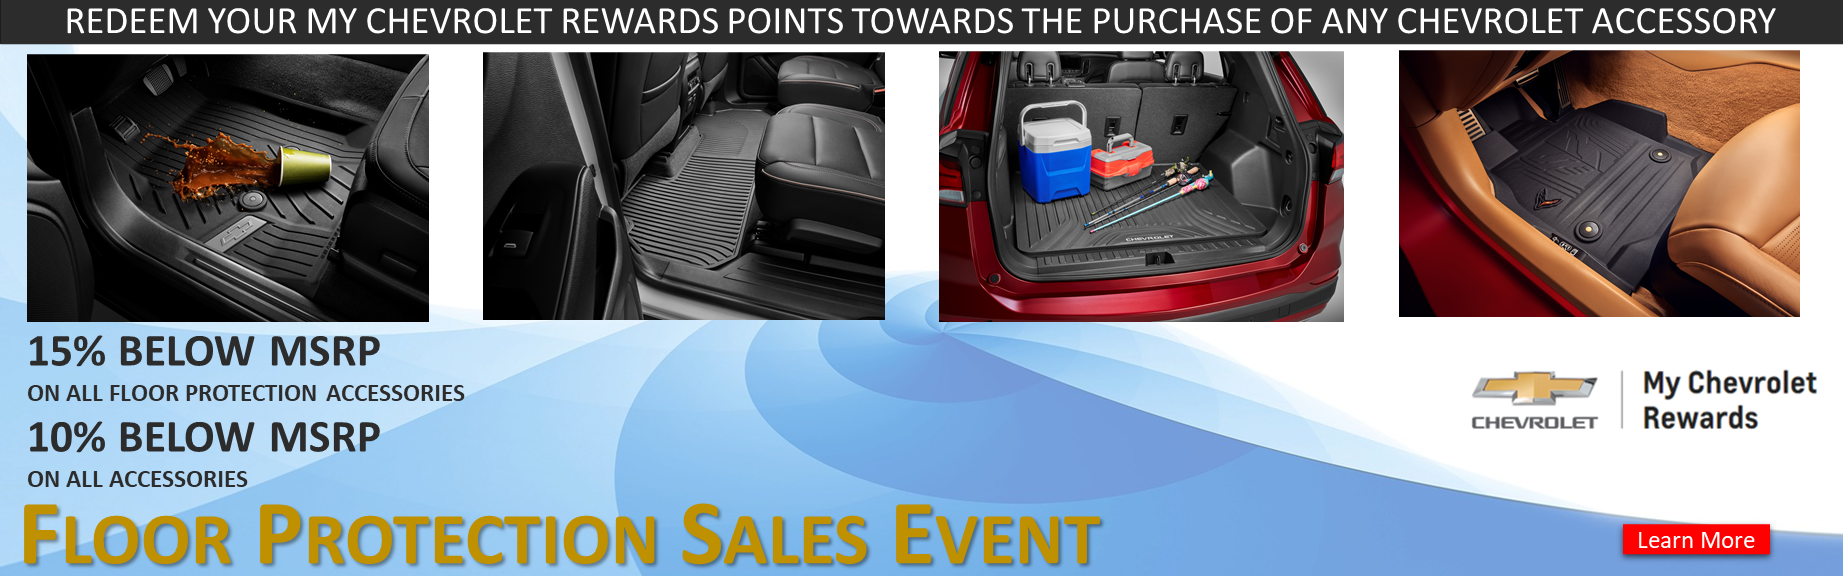 Floor Protection Sales Event 